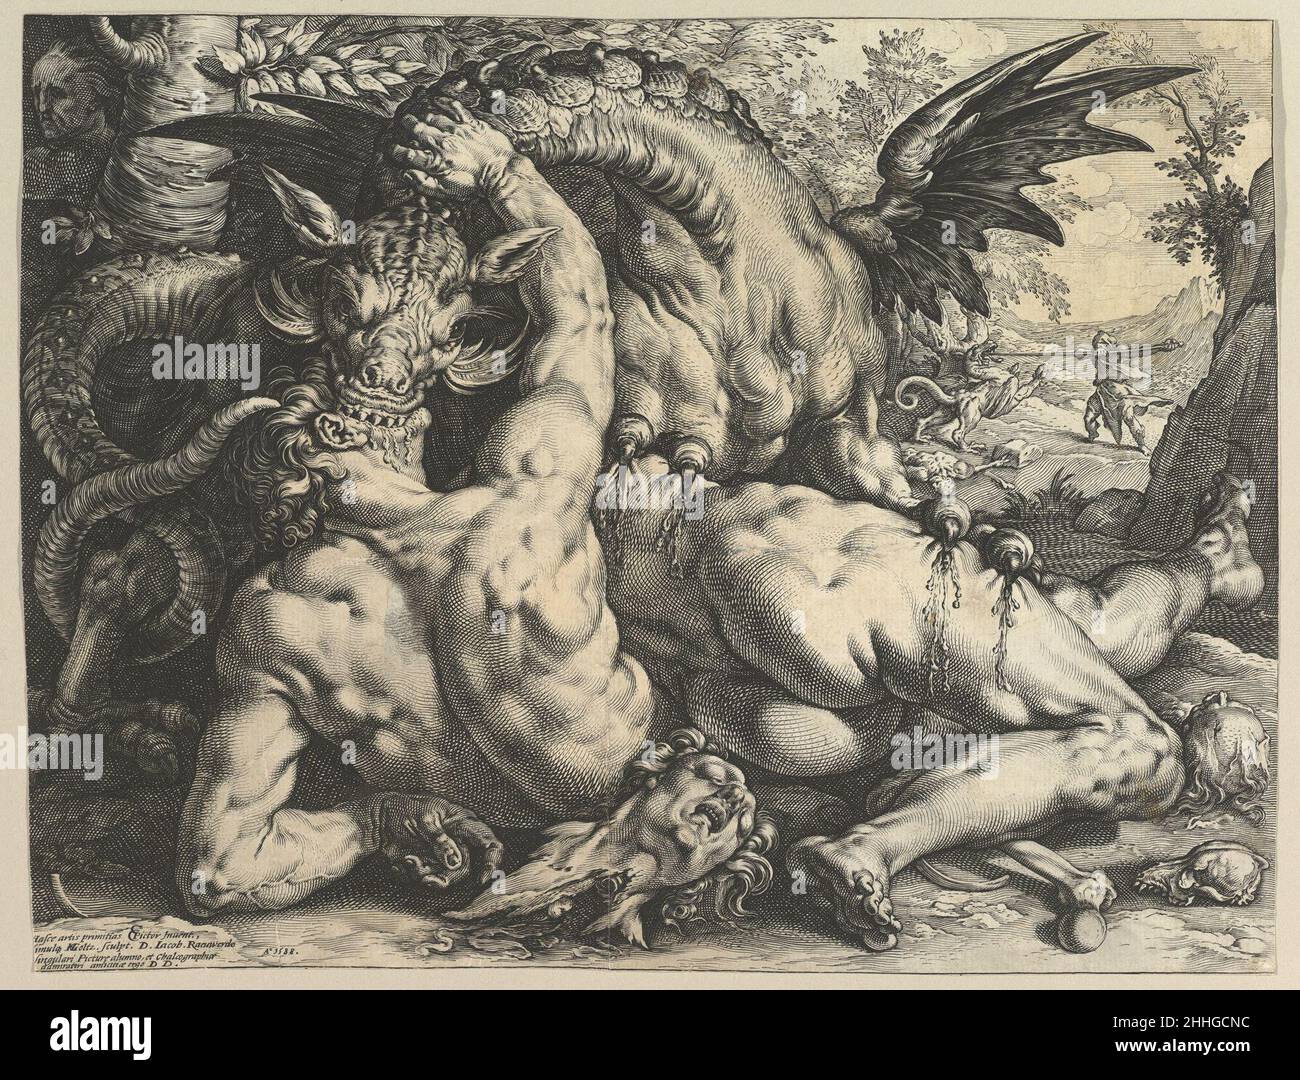 The Dragon Devouring the Companions of Cadmus 1588 Hendrick Goltzius Netherlandish In 1588 Goltzius made several iconic prints that pushed beyond the elegant Mannerism of Bartholomeus Spranger to a more exaggerated muscular style. Perhaps the most dramatic is this horrifying portrayal of The Dragon Devouring the Companions of Cadmus, after a painting by Cornelis Cornelisz. van Haarlem in the National Gallery, London (accession no. NG1893). The subject is taken from Book III of Ovid’s Metamorphoses. The engraving illustrates two scenes from the story of Cadmus, the prince of Tyre, whose sister Stock Photo